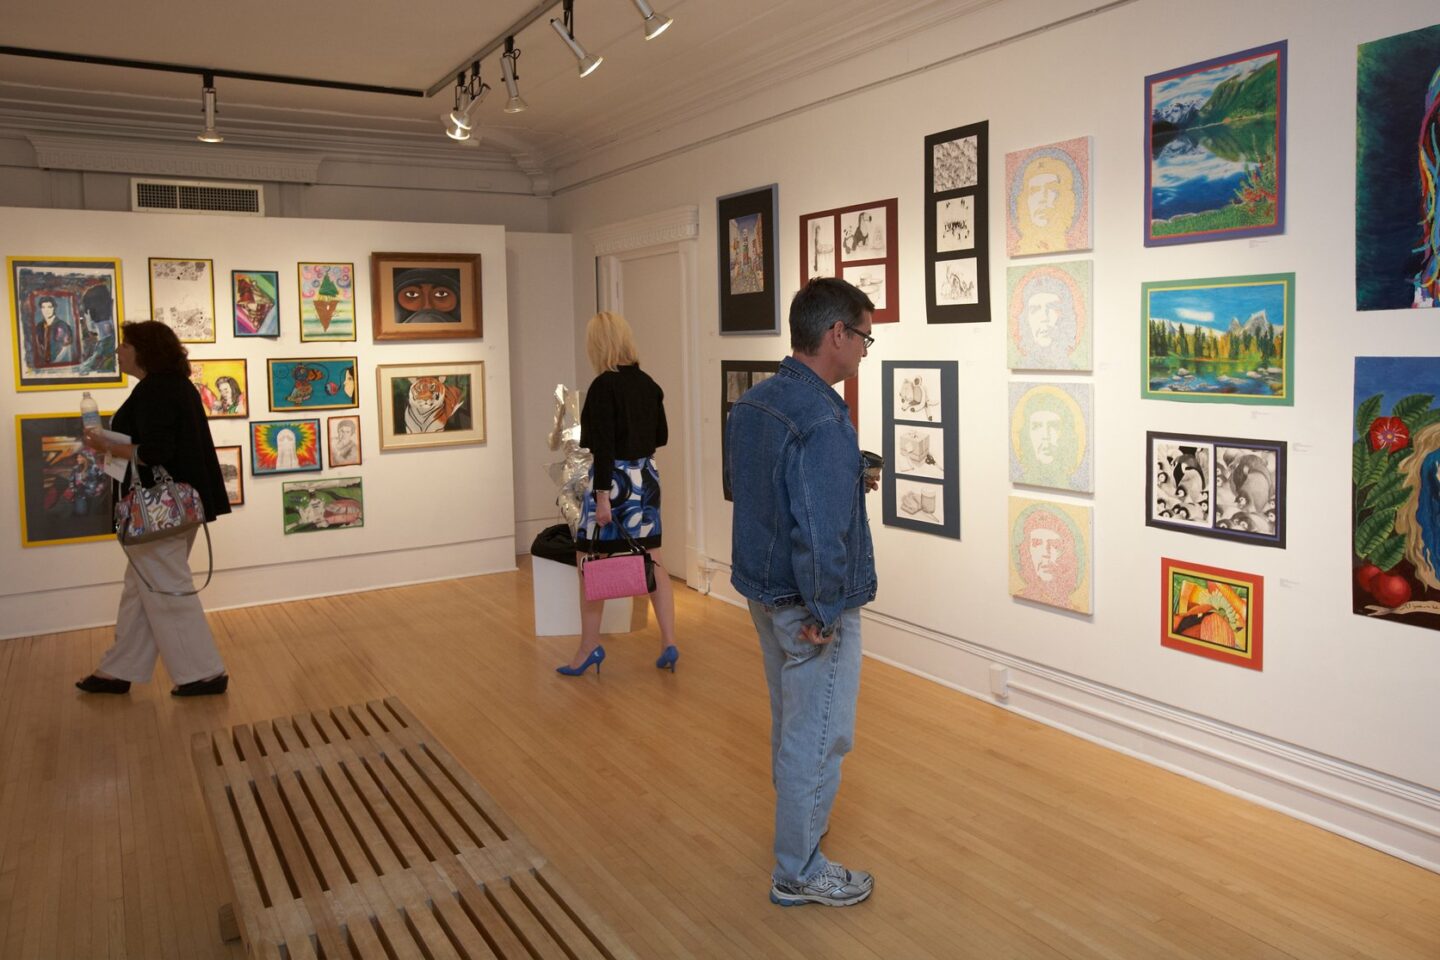 Become at Member at Glenhyrst Art Gallery